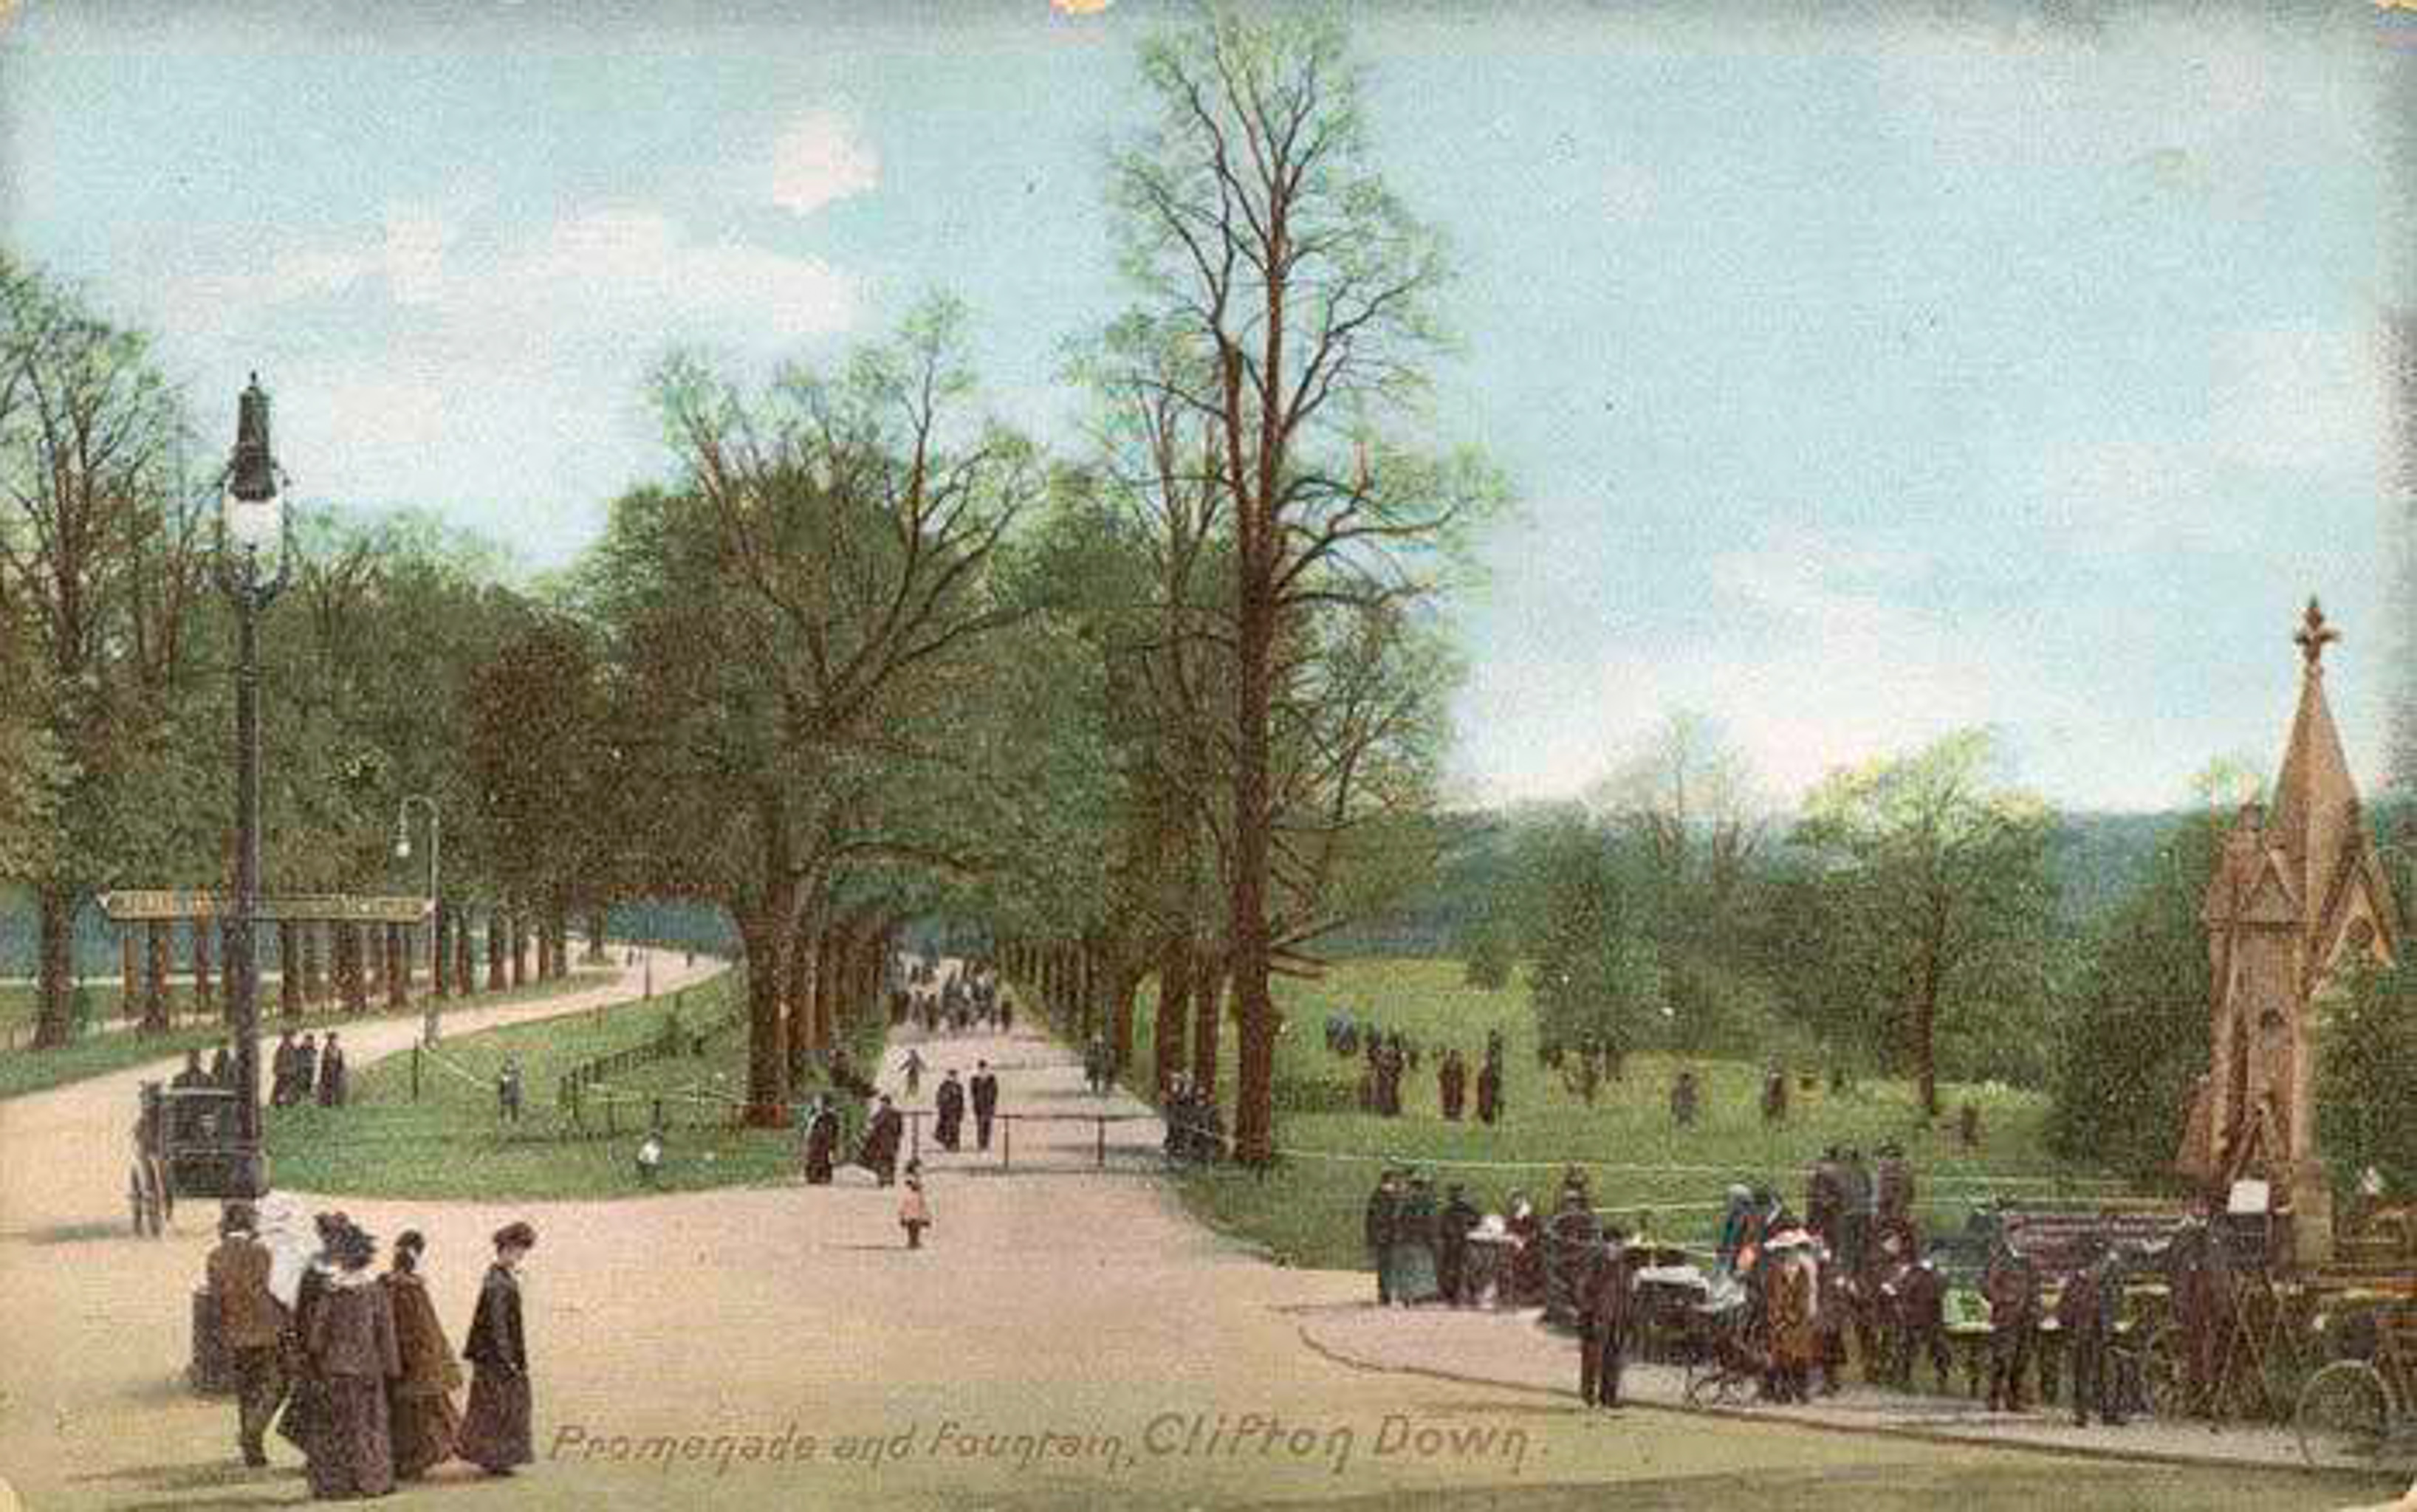 Promenade of Yesteryear
This postcard is from somewhere between 1900 and 1920, courtesy of the Historic England archive.

This is the view I was trying to recreate -- note...